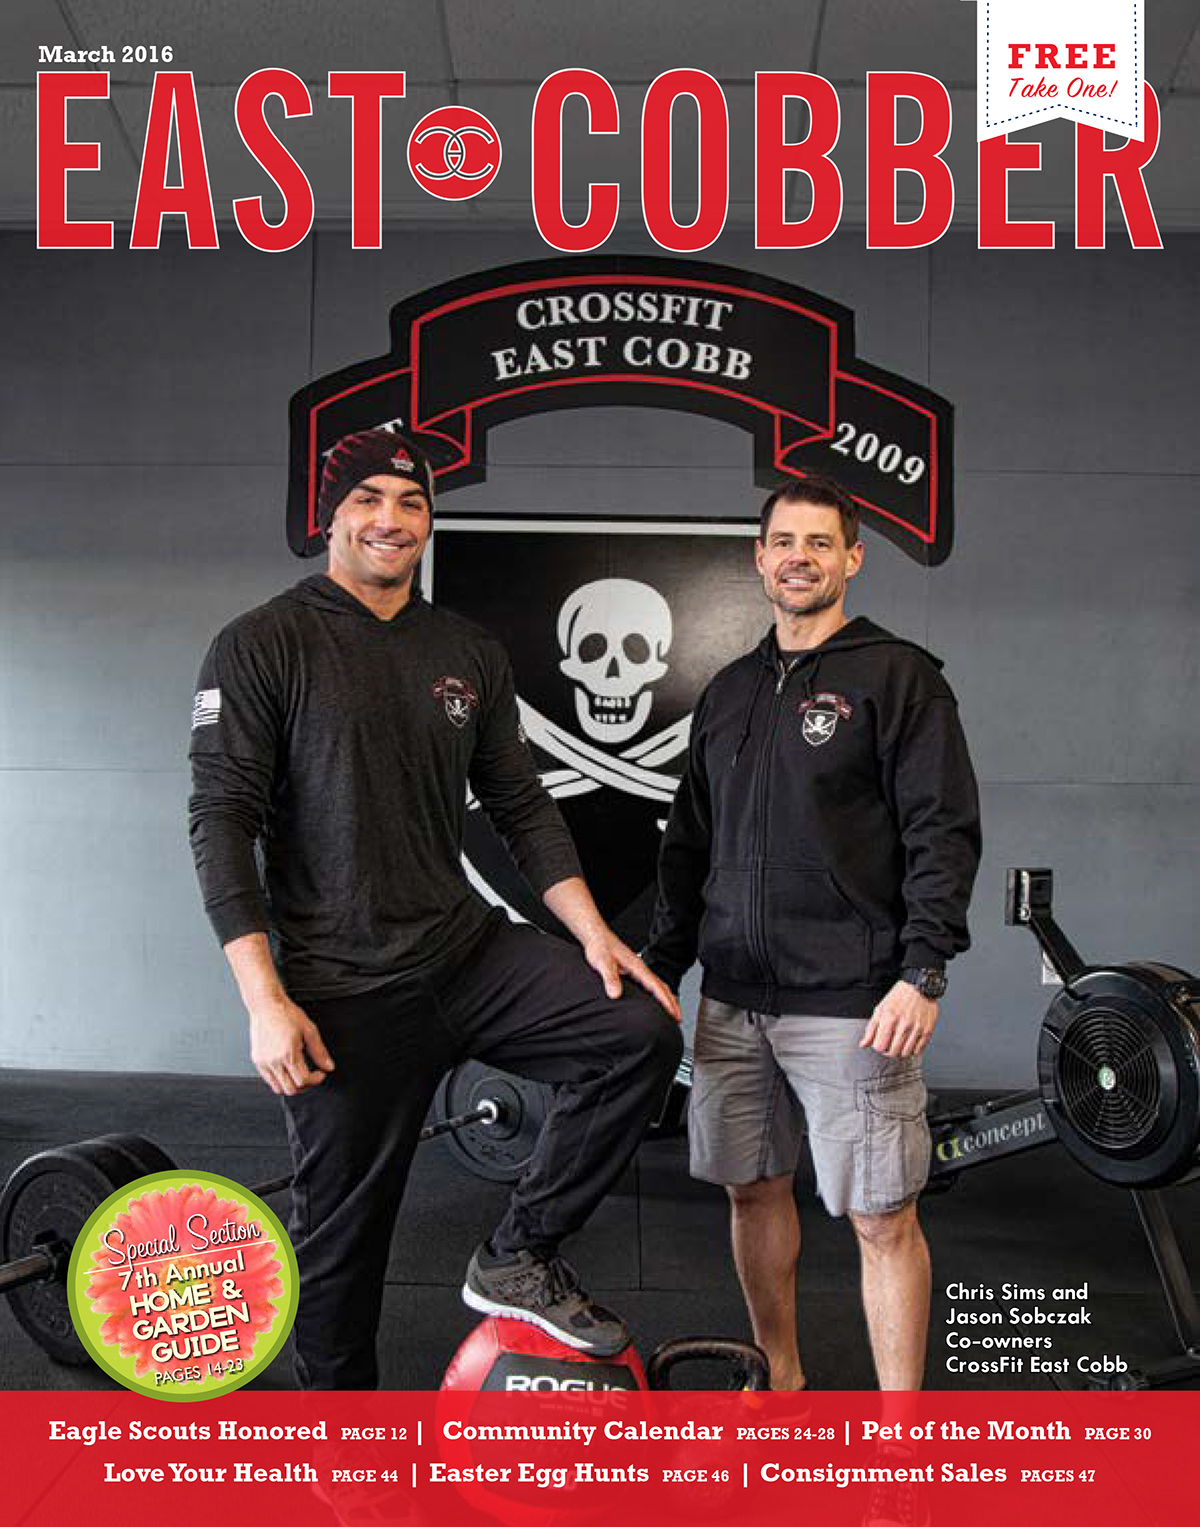 LOOK WHO’S ON OUR FRONT COVER: THE OWNERS OF CROSSFIT EAST COBB